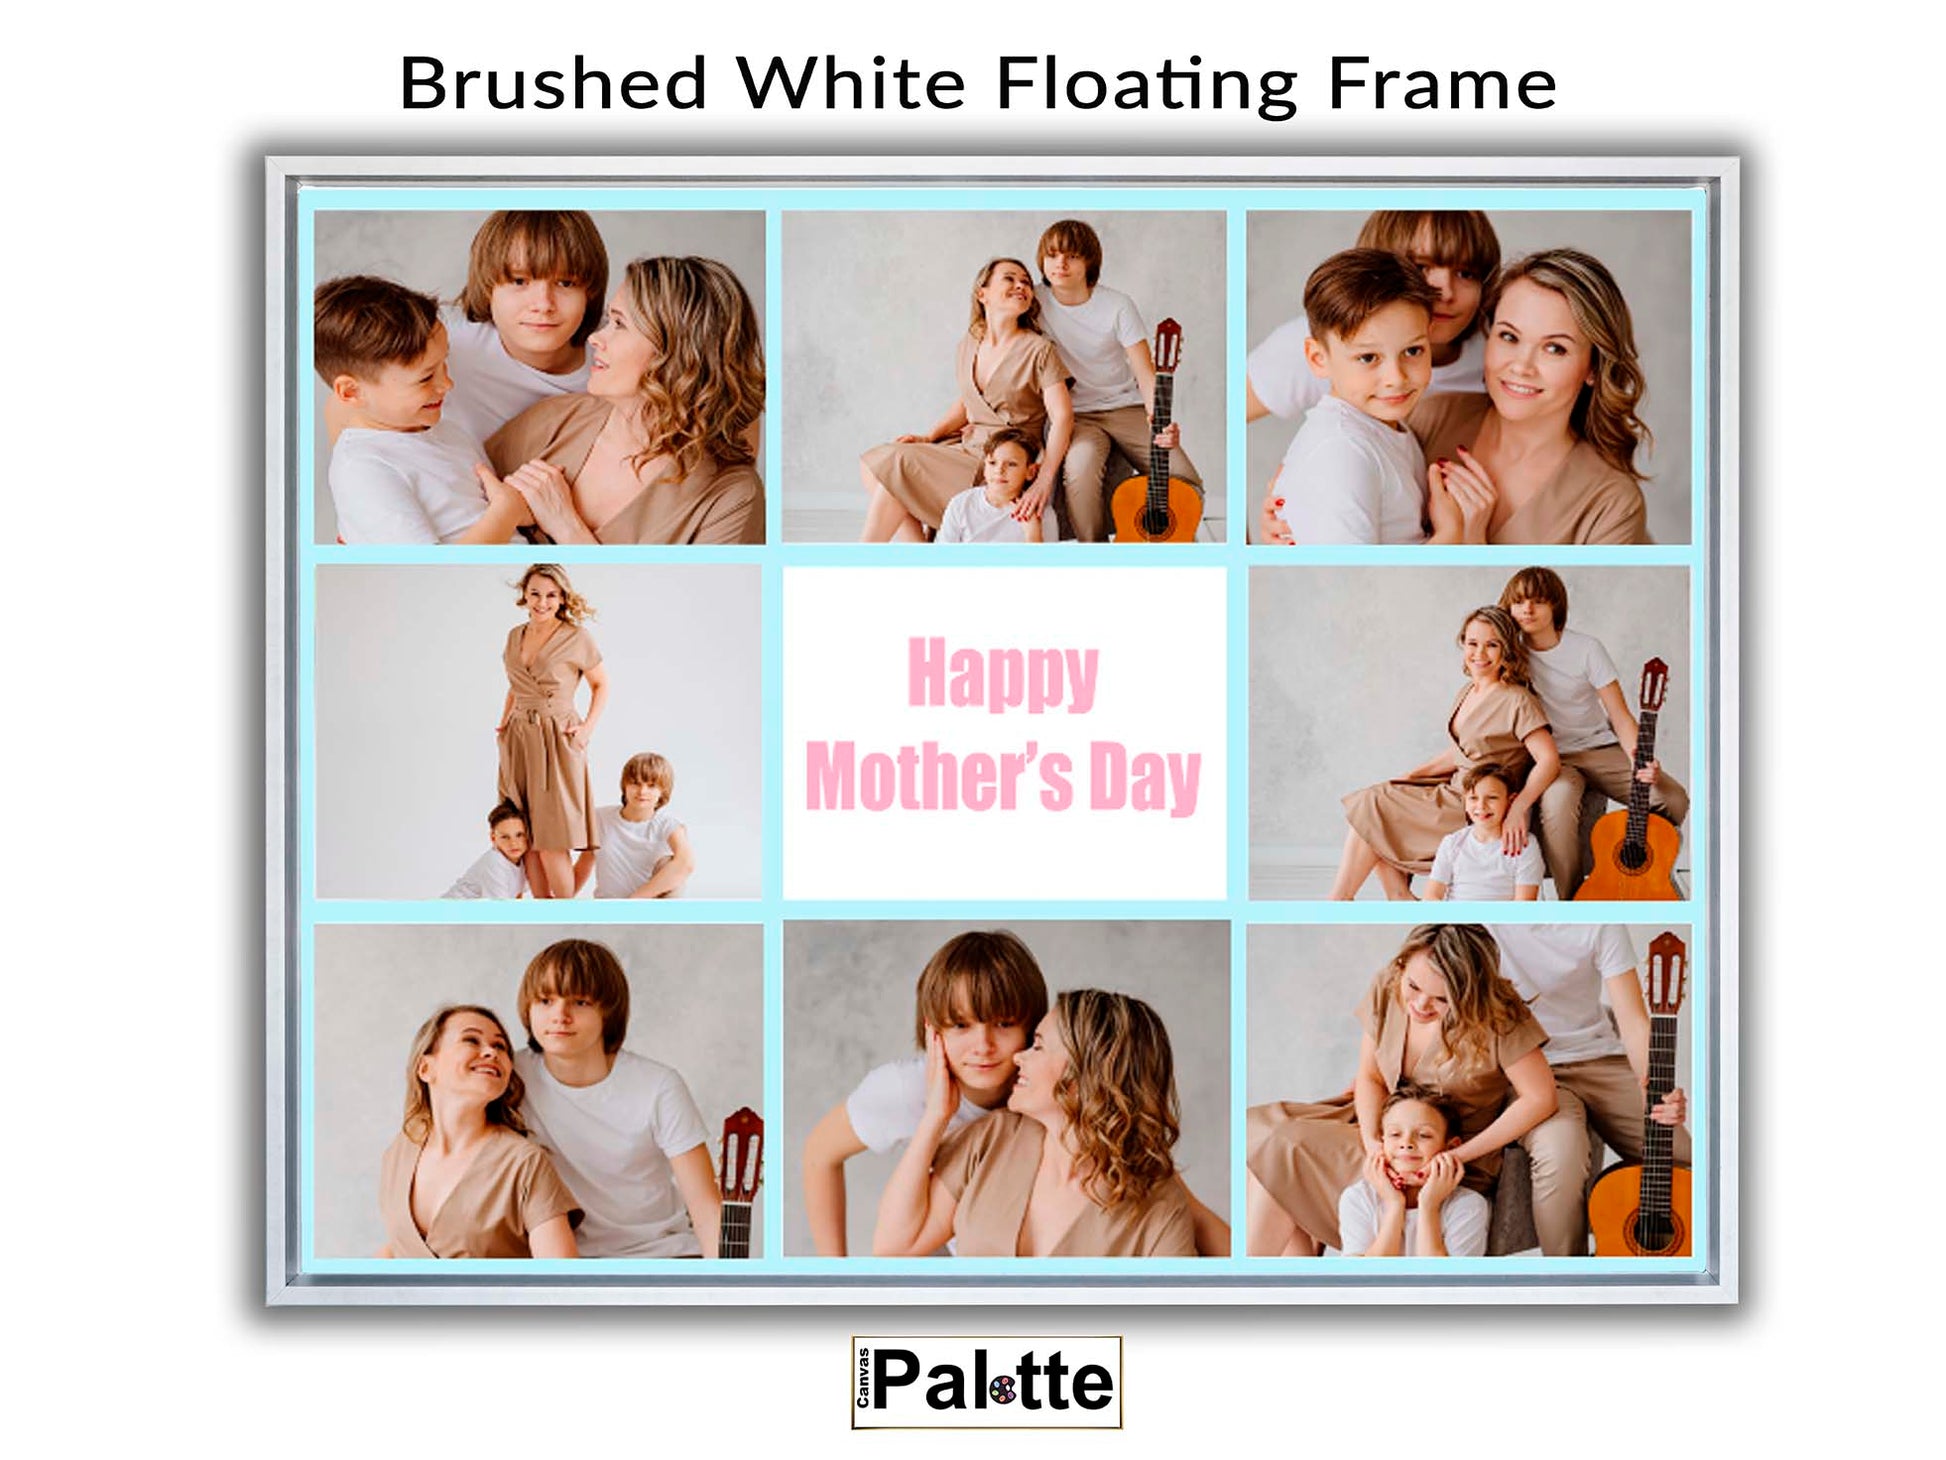 Example brushed white floating frame for canvas printed at Canvas Palette